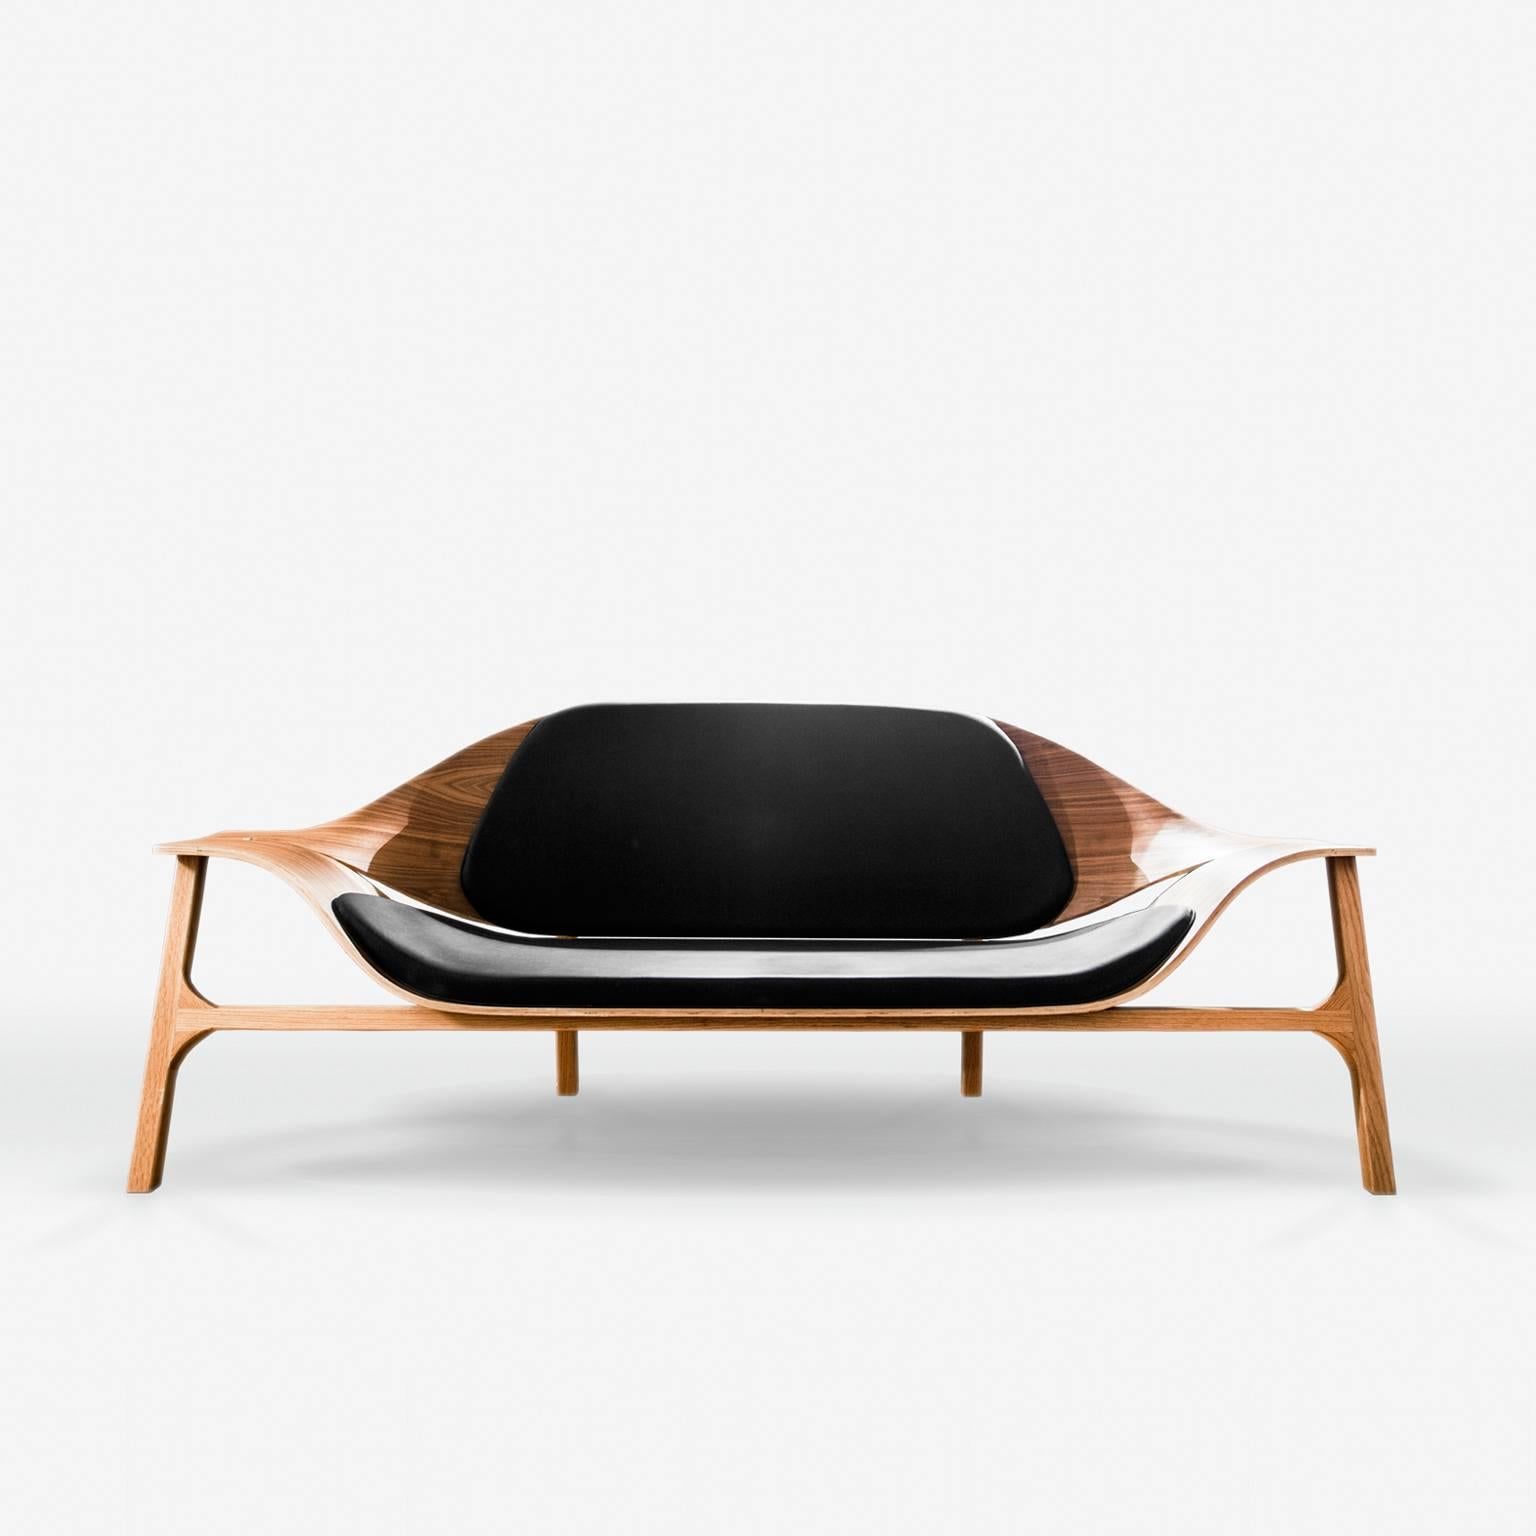 The Mr. Eames chair is a piece of furniture for semi intimate spaces in public places. A sofa designed to get lost in a book, enjoy an informal talk or just a drink. Mr Eames brings the comfort of a chaise longue to the office space with a